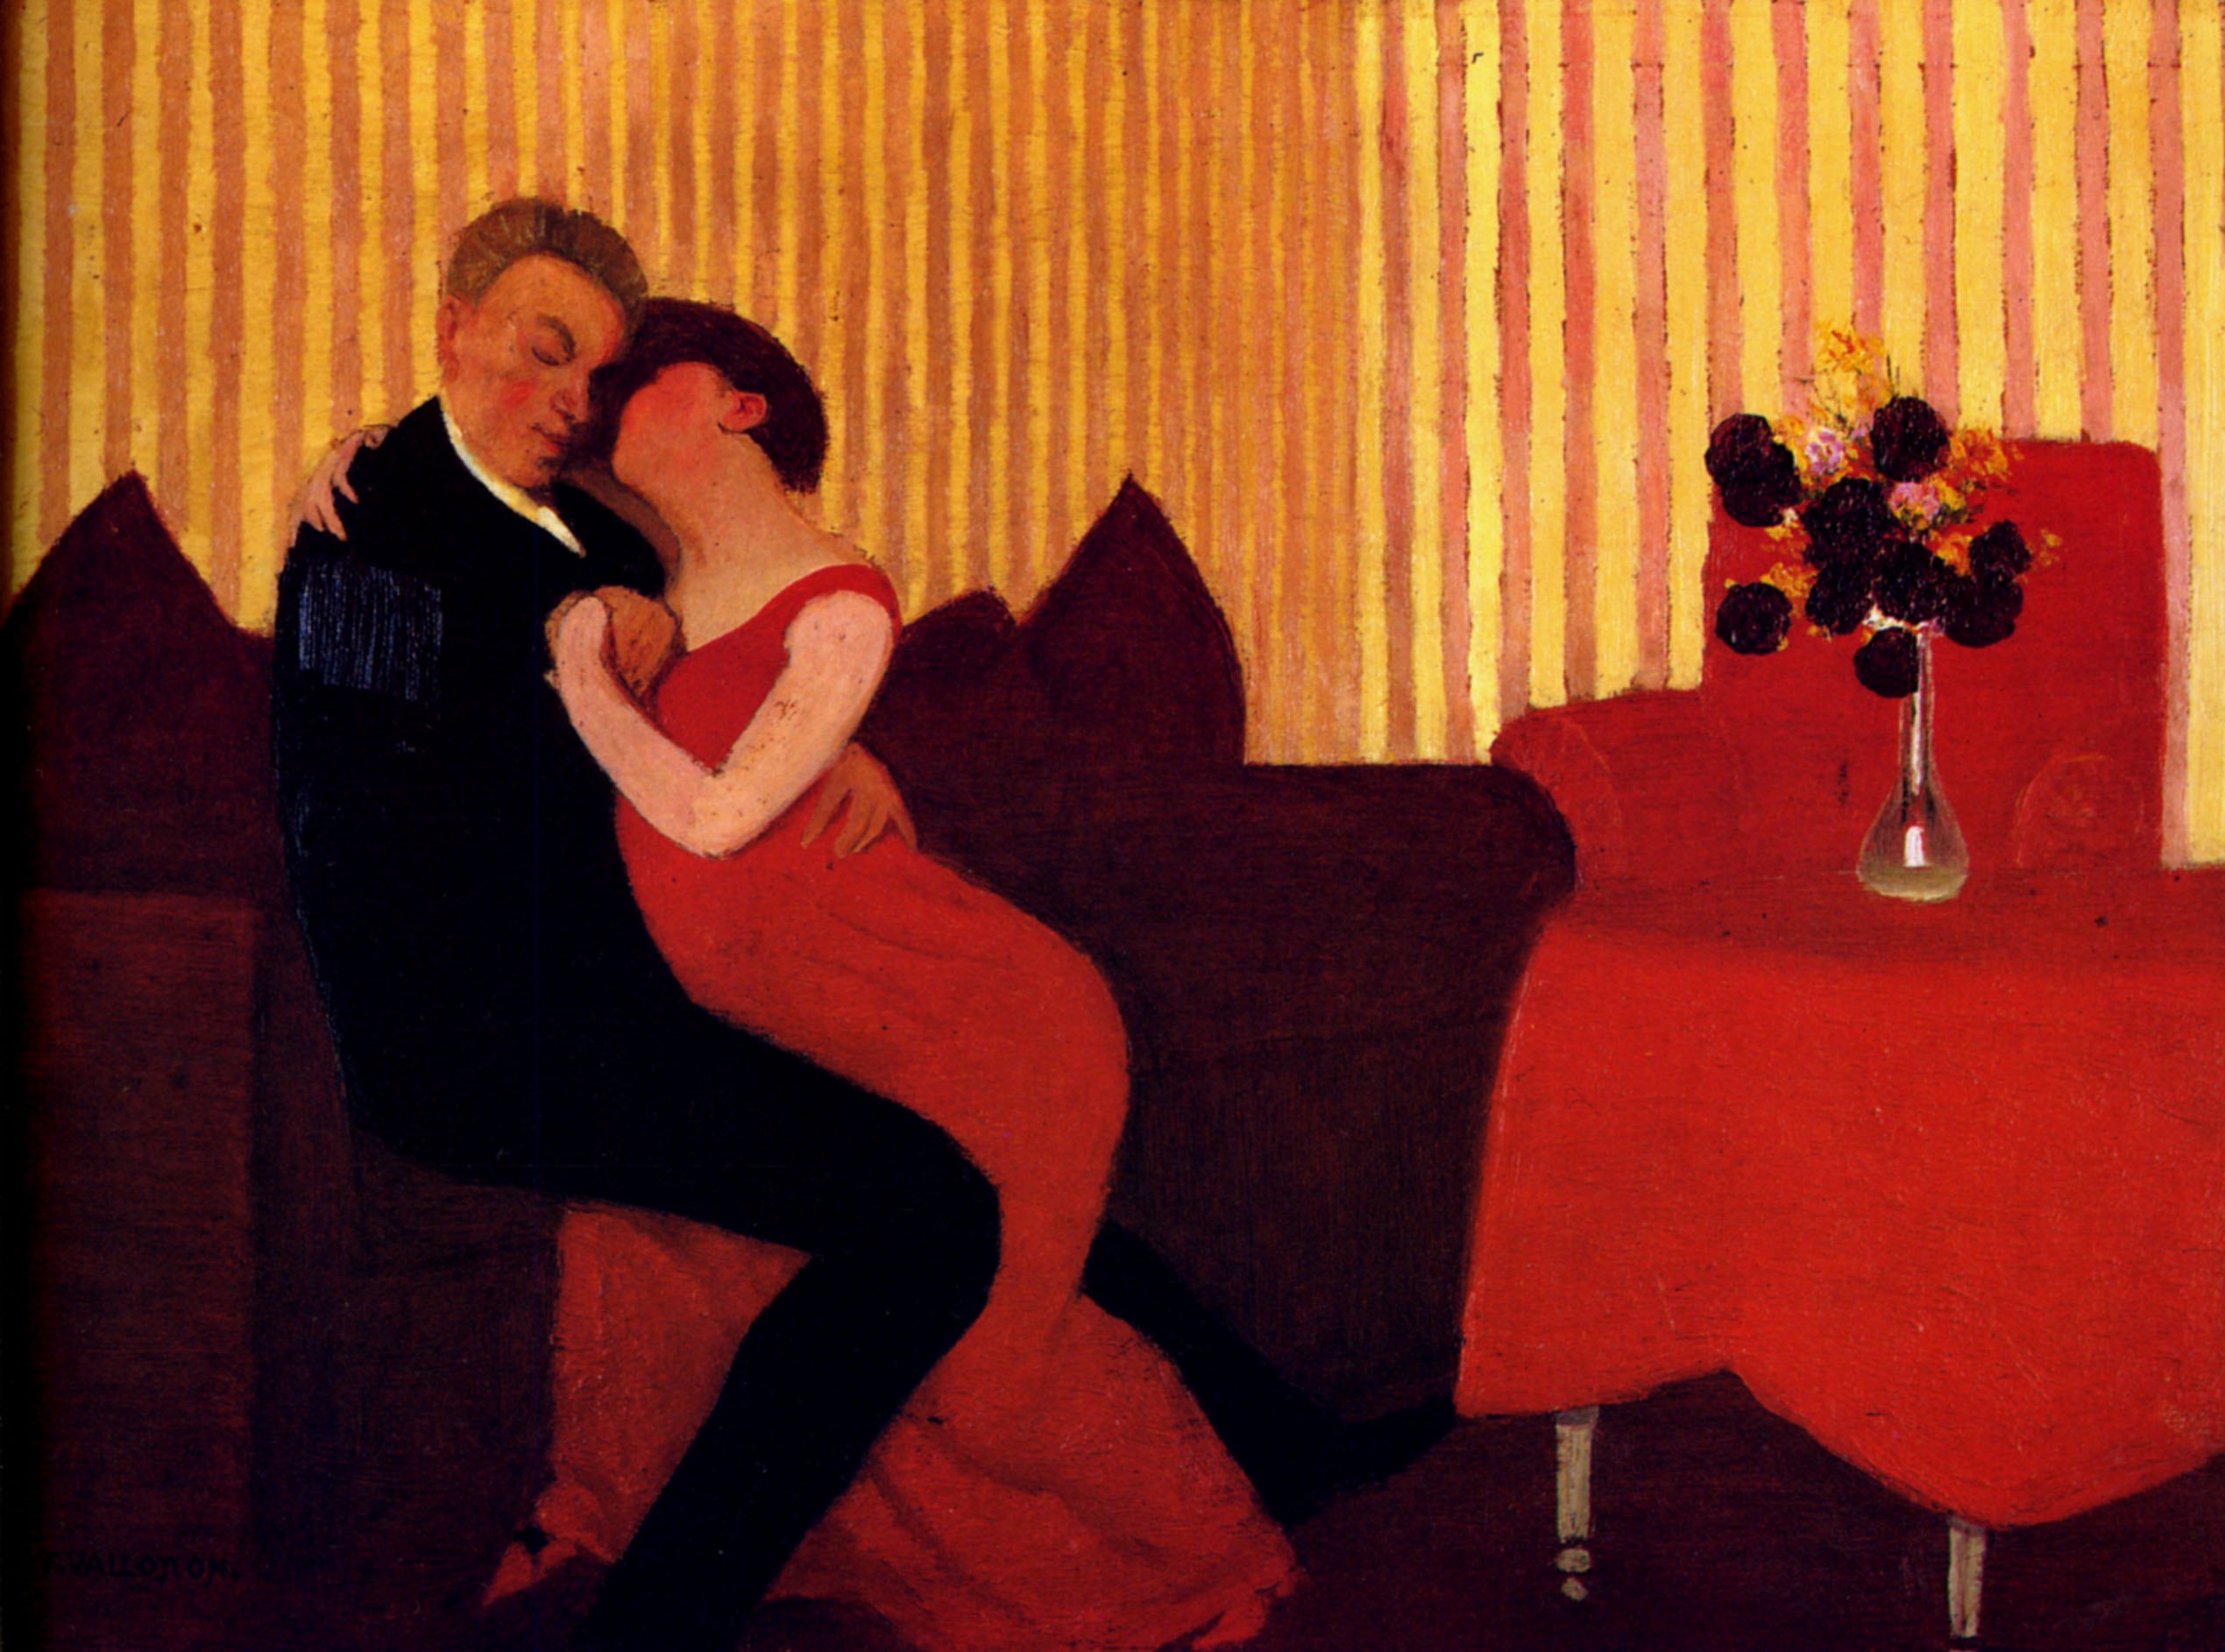 The Lie by Félix Vallotton - 1897 - 9 7/16 x 13 1/8 in Baltimore Museum of Art